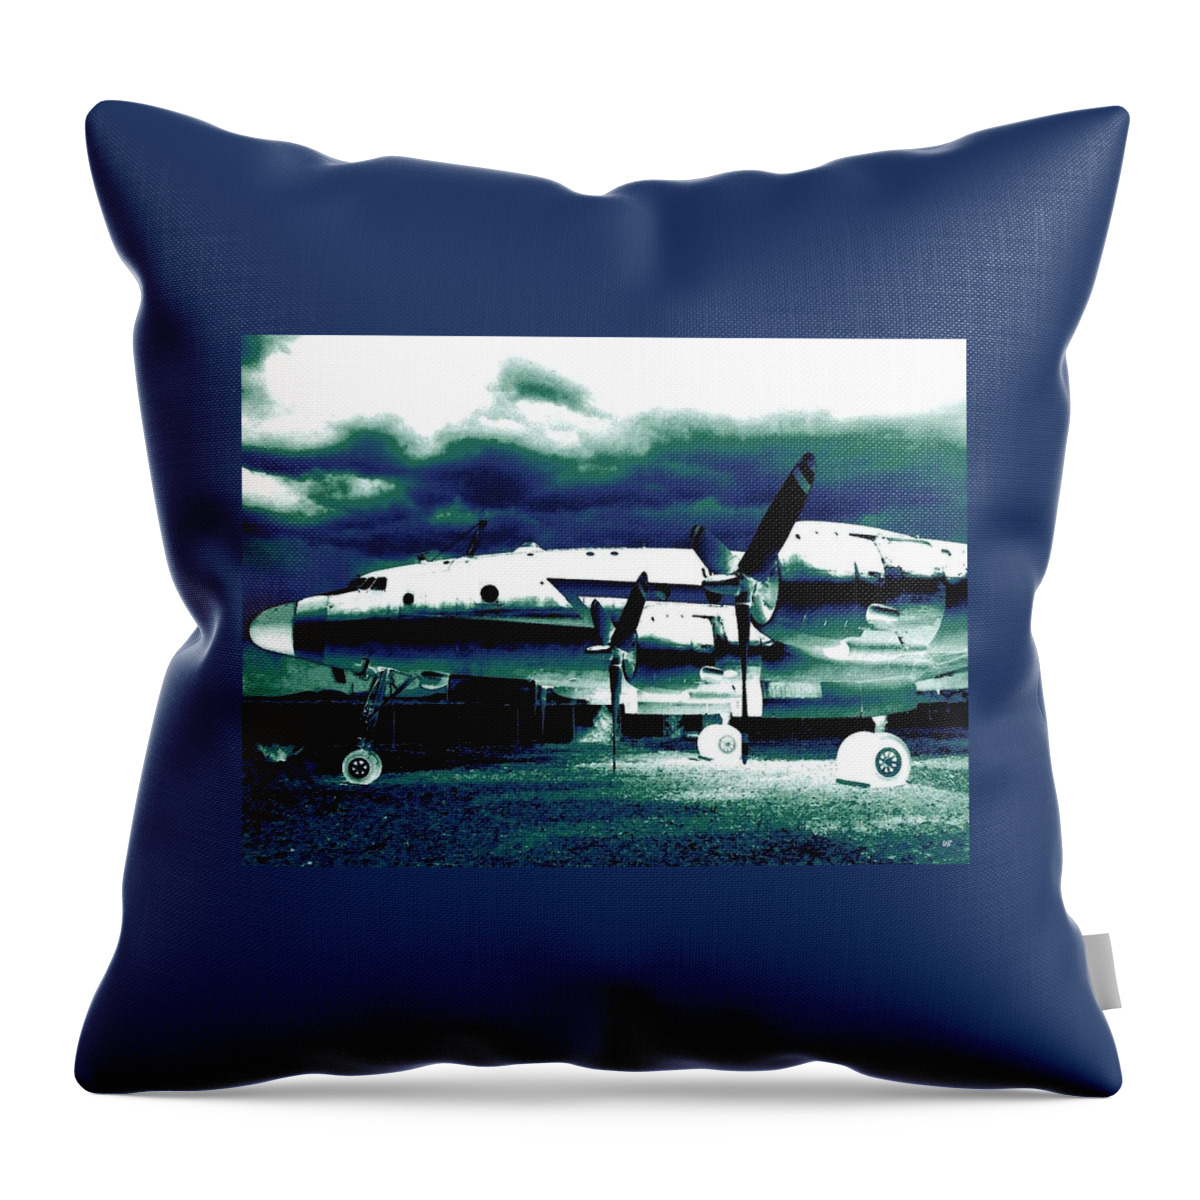 Impressions Throw Pillow featuring the digital art Impressions 7 by Will Borden